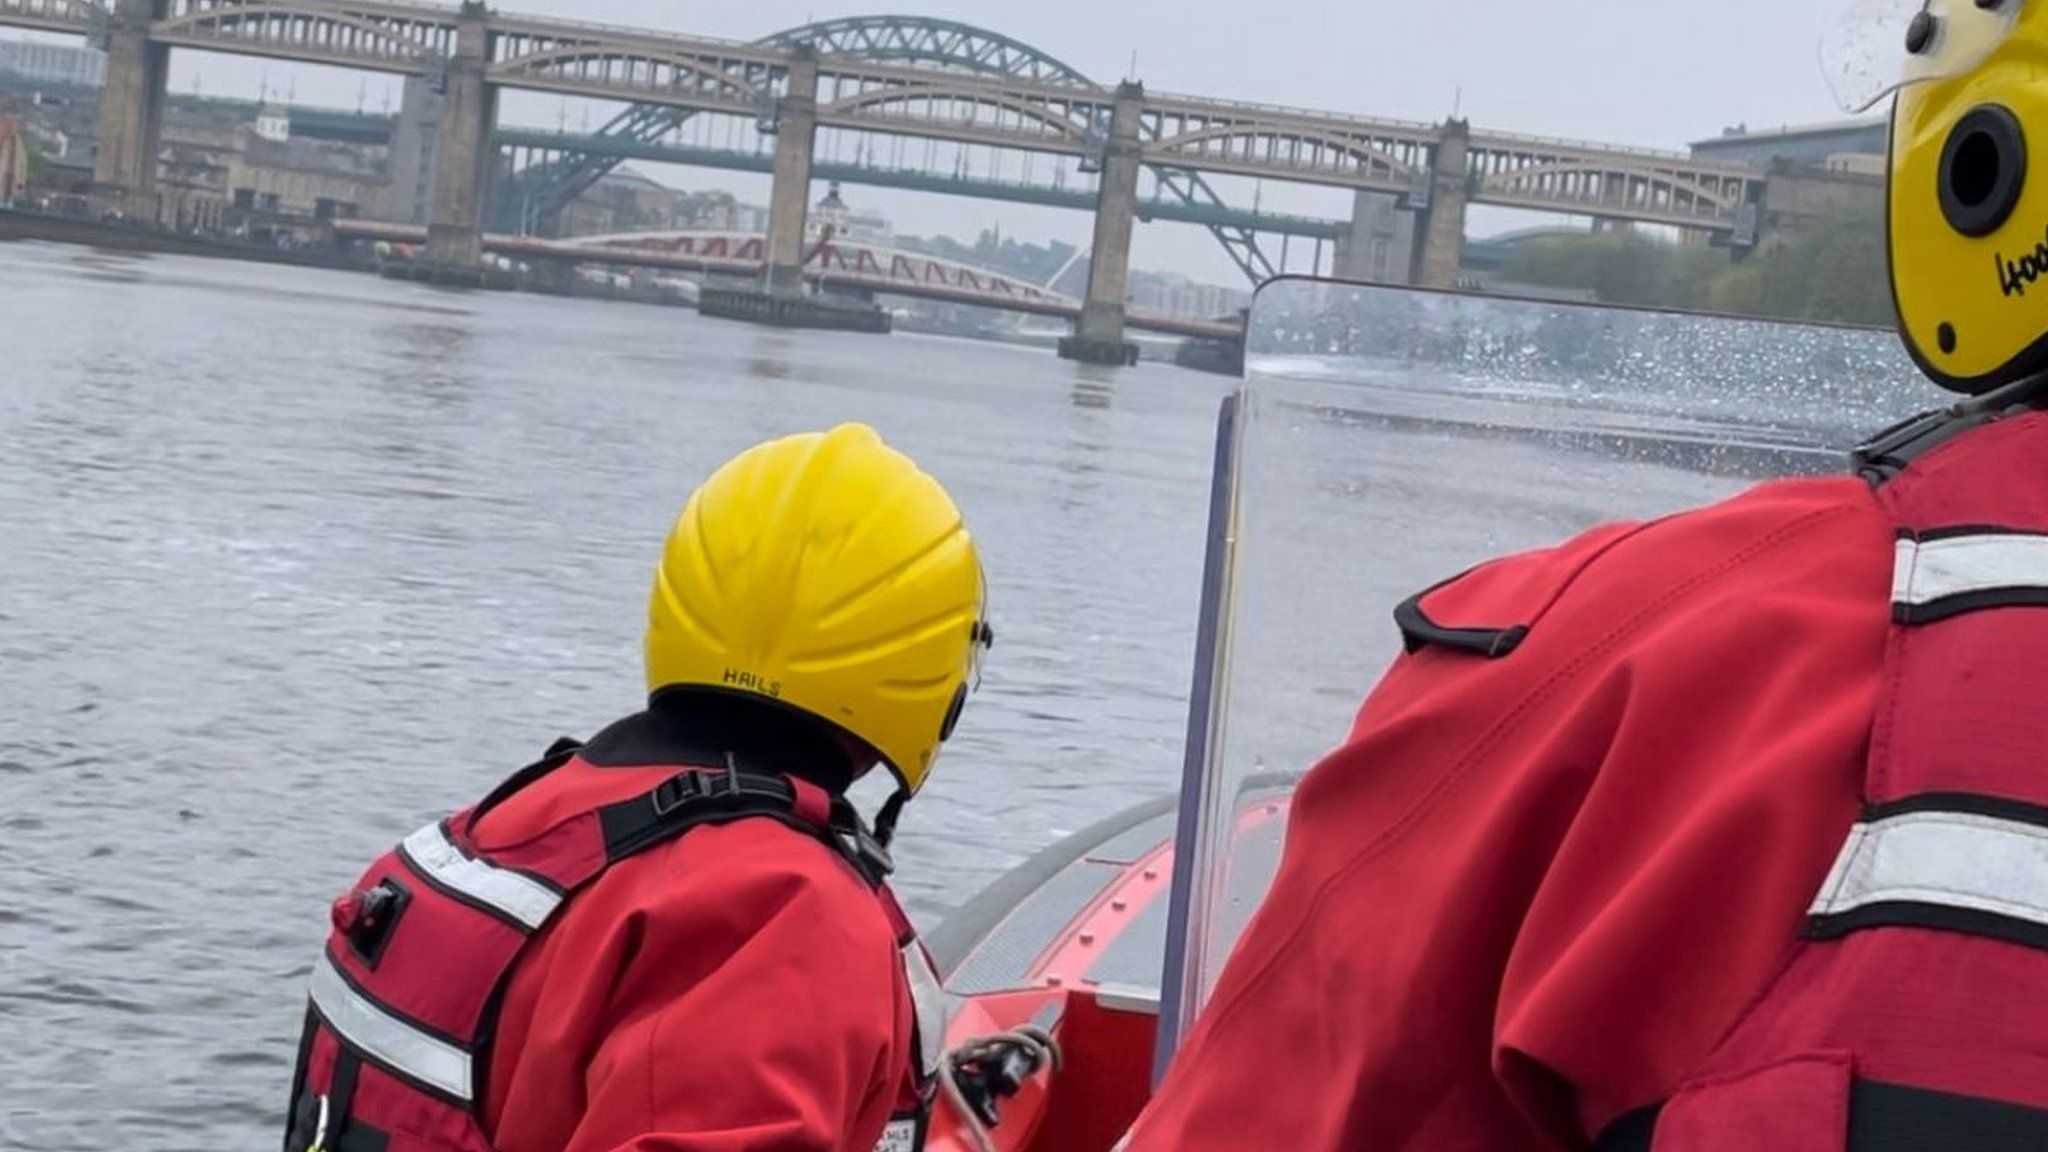 TWFRS Fire boat on the River Tyne